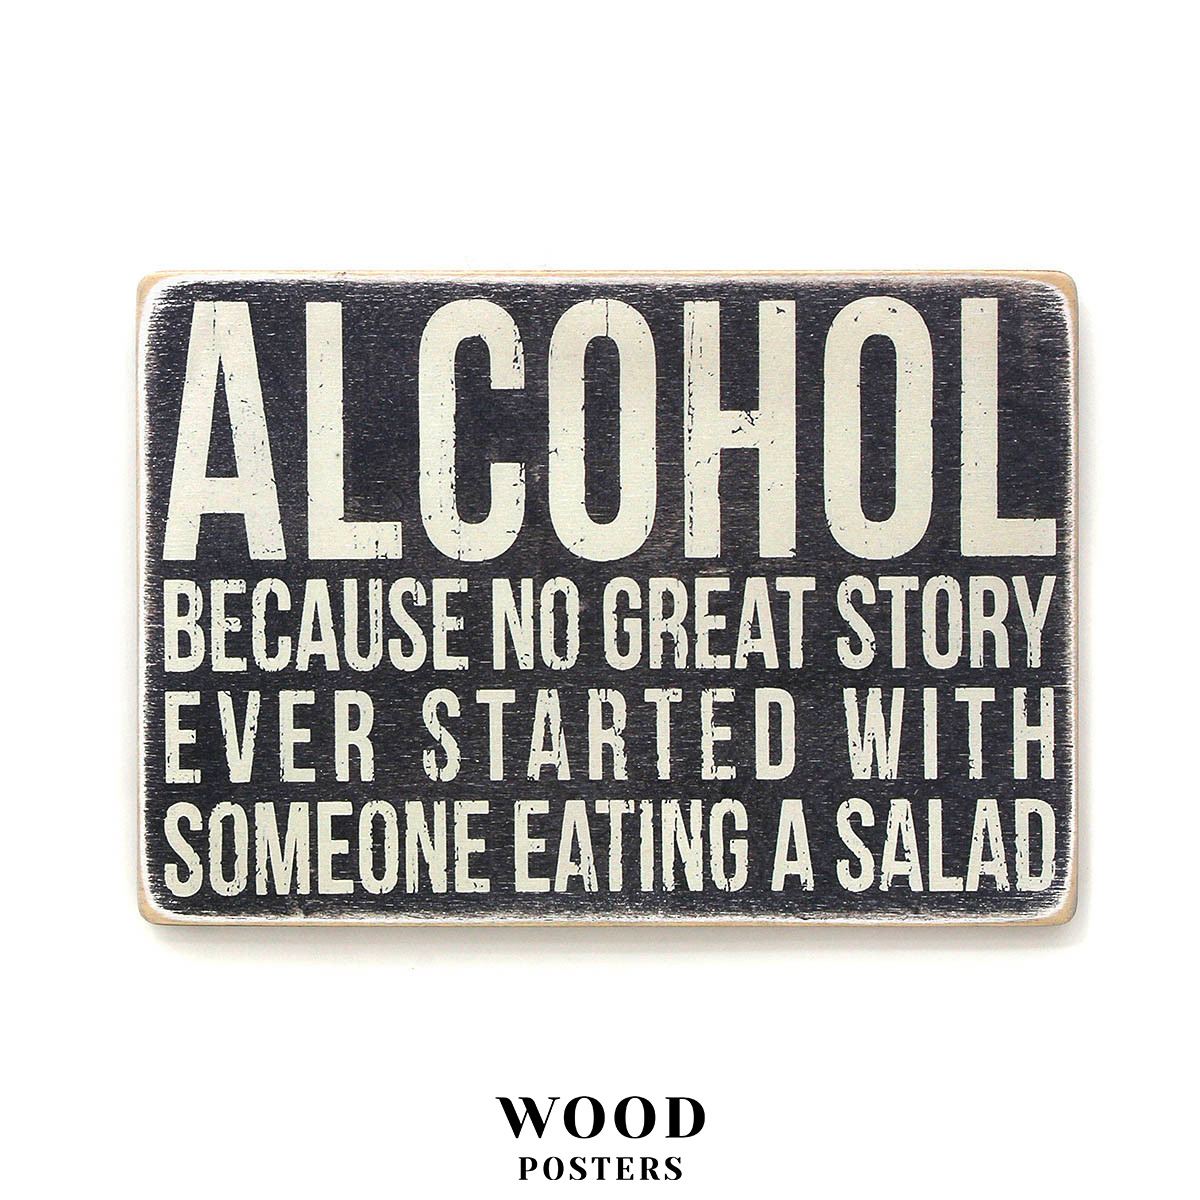  Alcohol. Because no great story ever started with someone eating a salad 